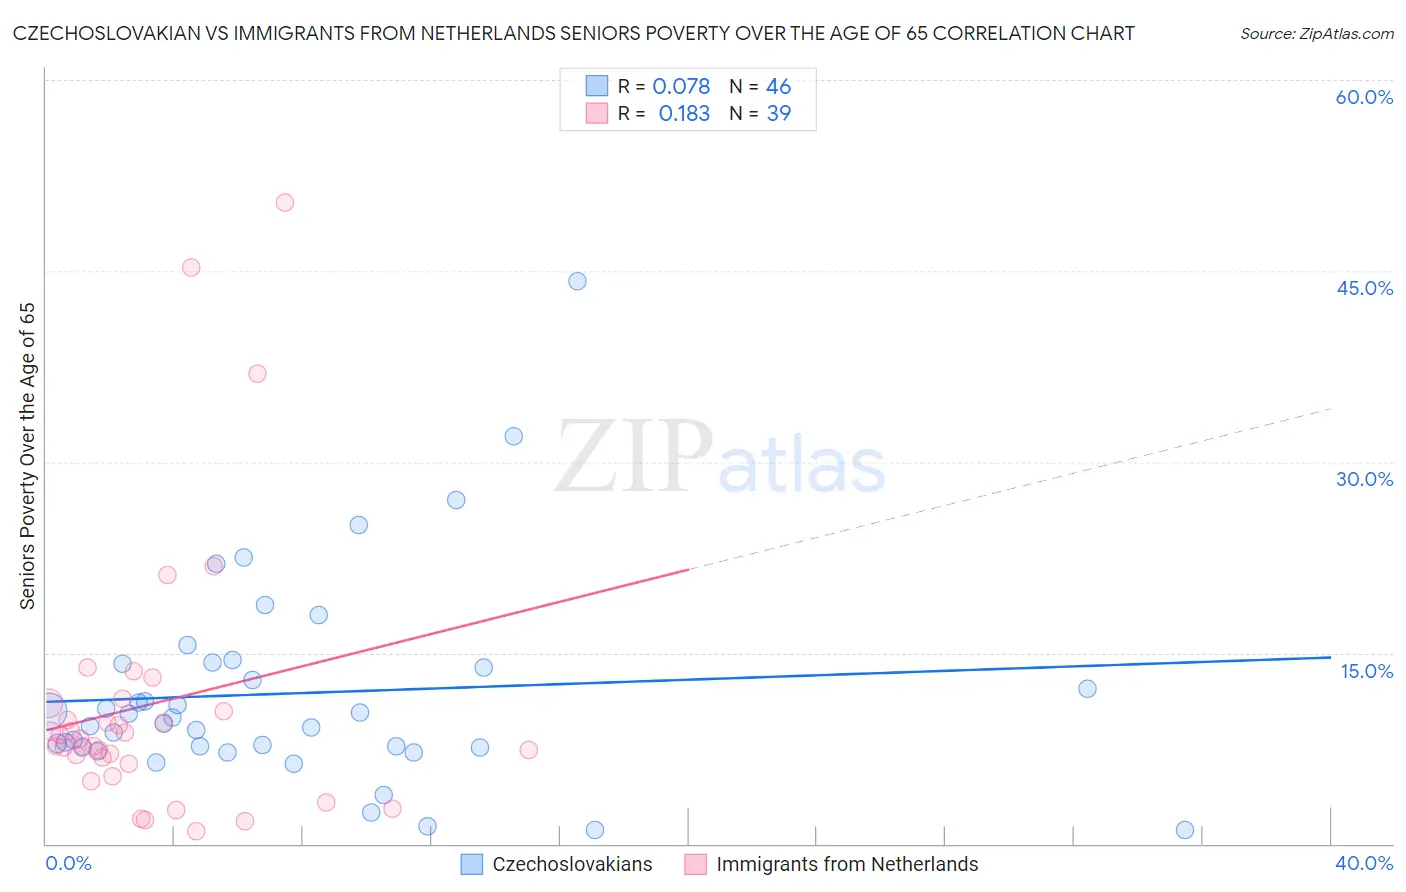 Czechoslovakian vs Immigrants from Netherlands Seniors Poverty Over the Age of 65